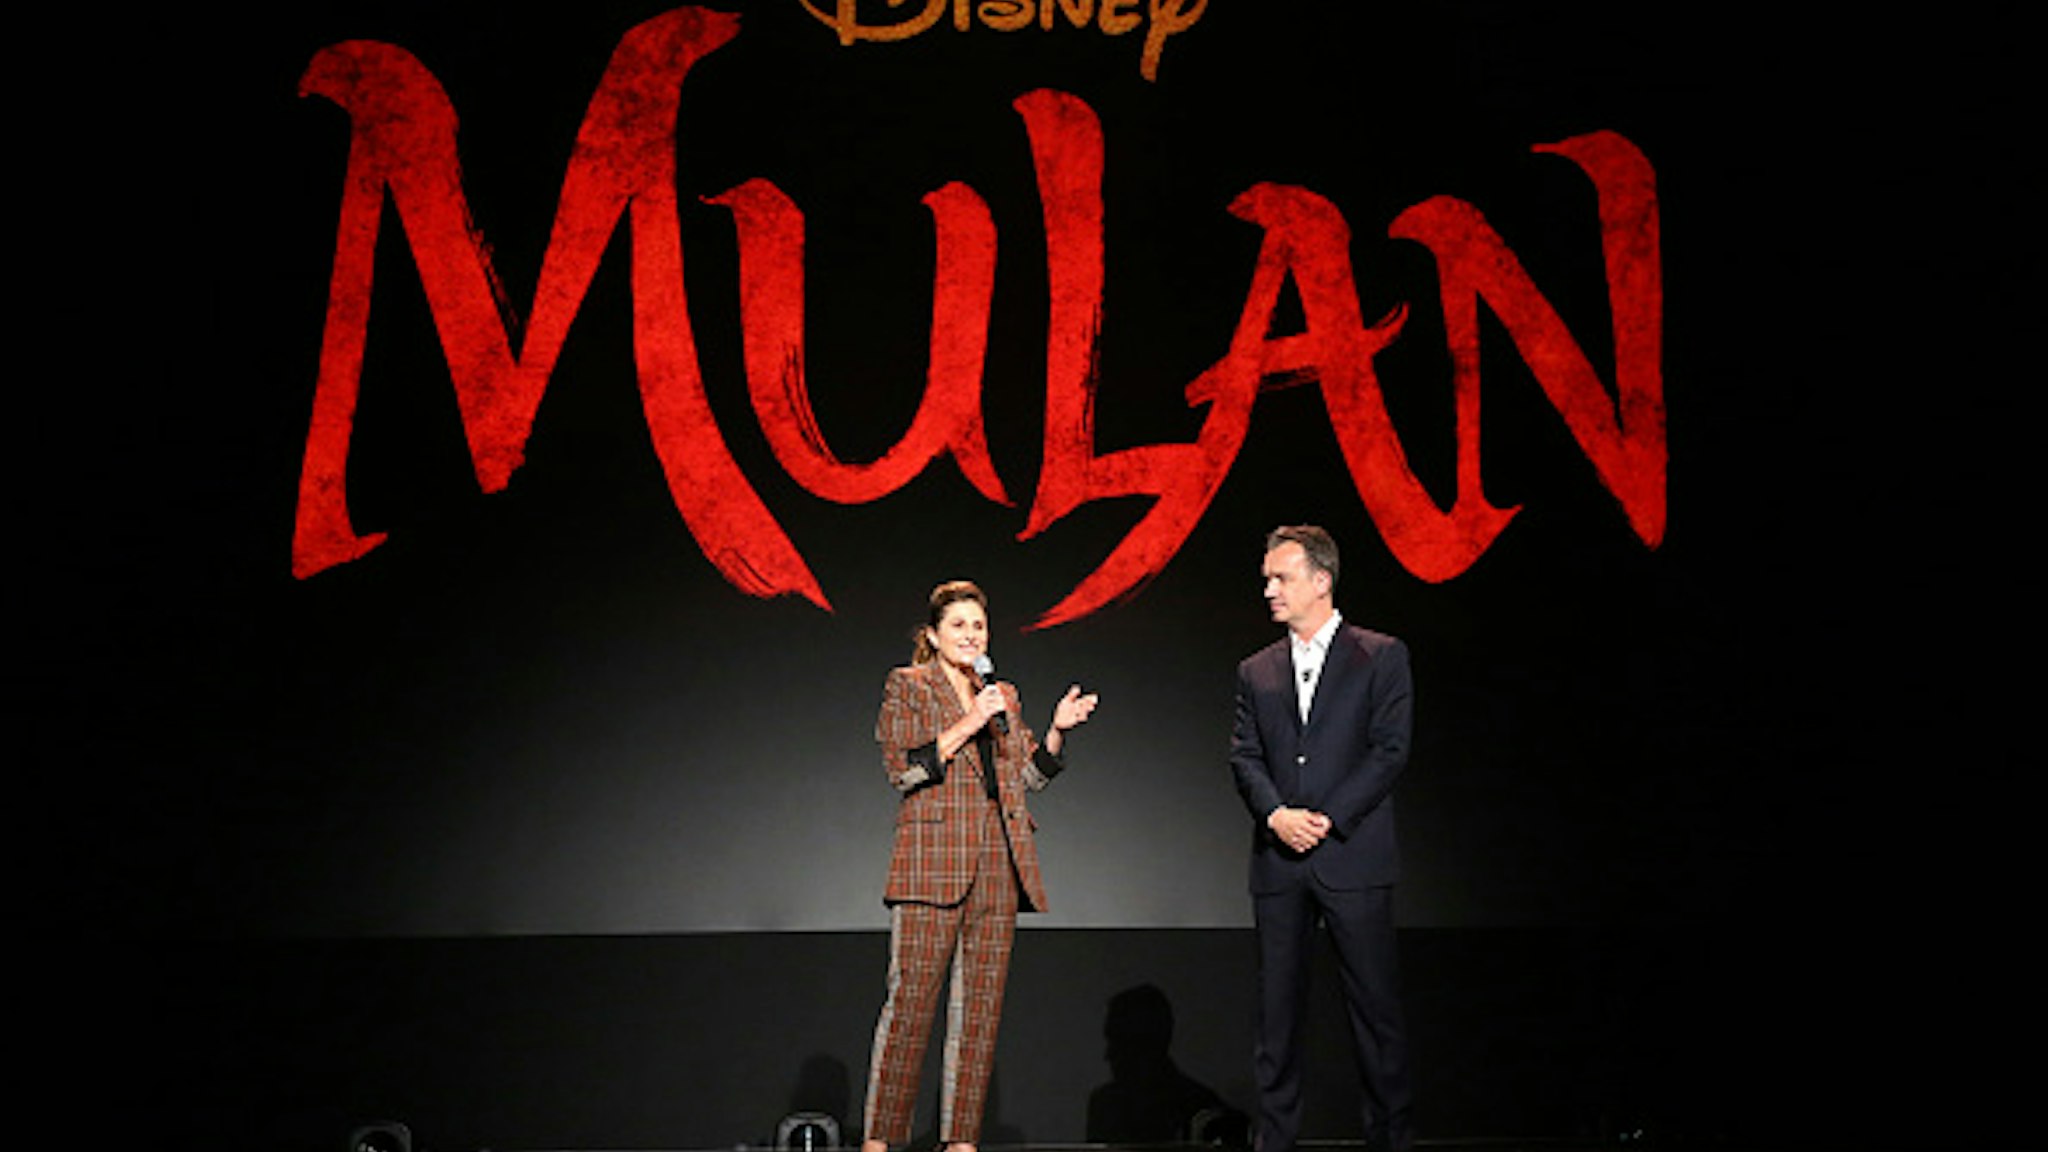 ANAHEIM, CALIFORNIA - AUGUST 24: (L-R) Director Niki Caro of 'Mulan' and President of Walt Disney Studios Motion Picture Production Sean Bailey took part today in the Walt Disney Studios presentation at Disney’s D23 EXPO 2019 in Anaheim, Calif. 'Mulan' will be released in U.S. theaters on March 27, 2020.